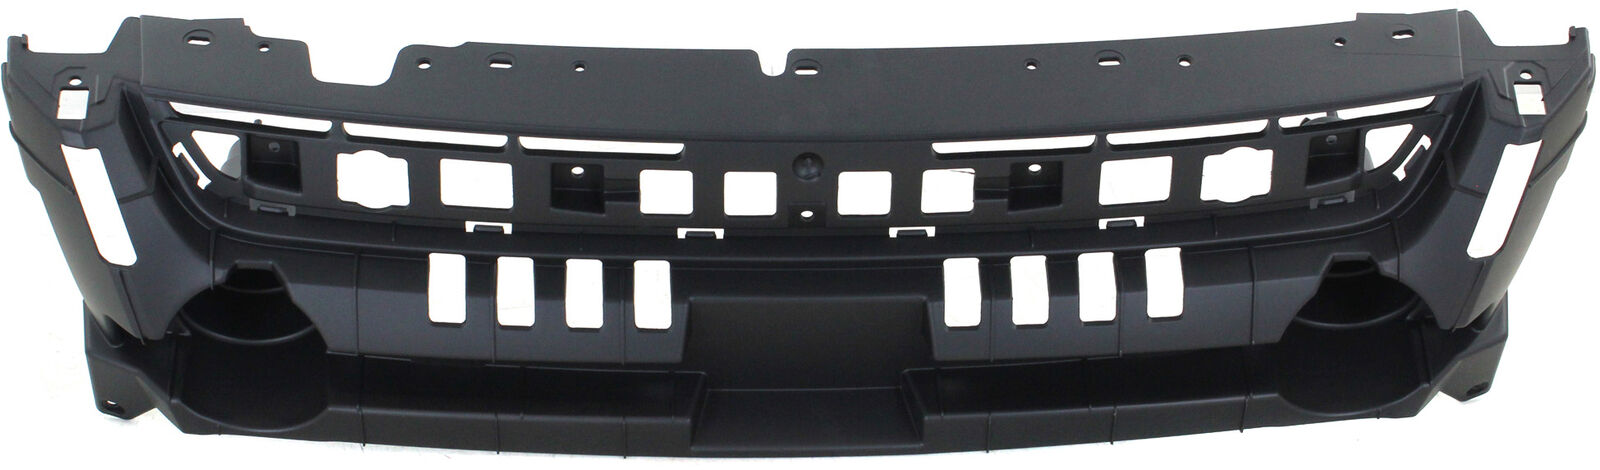  New Header Panel For Ford Escape 2013-2016